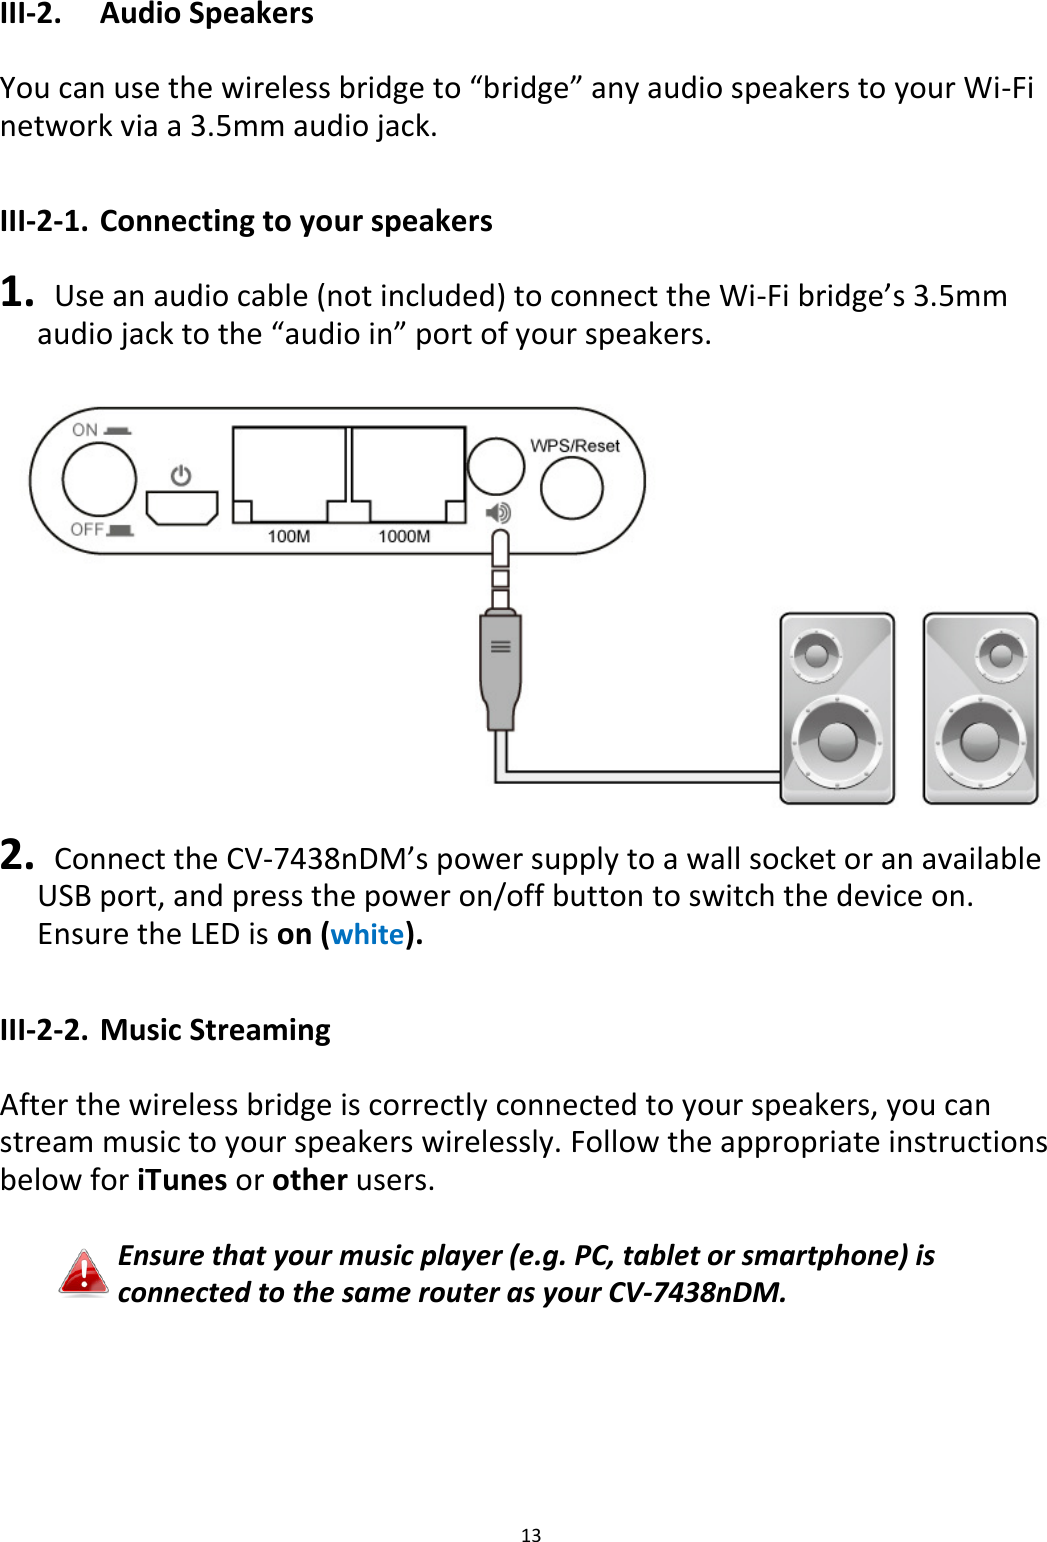 13  III-2.  Audio Speakers  You can use the wireless bridge to “bridge” any audio speakers to your Wi-Fi network via a 3.5mm audio jack.  III-2-1. Connecting to your speakers  1.   Use an audio cable (not included) to connect the Wi-Fi bridge’s 3.5mm audio jack to the “audio in” port of your speakers.  2.   Connect the CV-7438nDM’s power supply to a wall socket or an available USB port, and press the power on/off button to switch the device on. Ensure the LED is on (white).  III-2-2. Music Streaming  After the wireless bridge is correctly connected to your speakers, you can stream music to your speakers wirelessly. Follow the appropriate instructions below for iTunes or other users.  Ensure that your music player (e.g. PC, tablet or smartphone) is connected to the same router as your CV-7438nDM.      